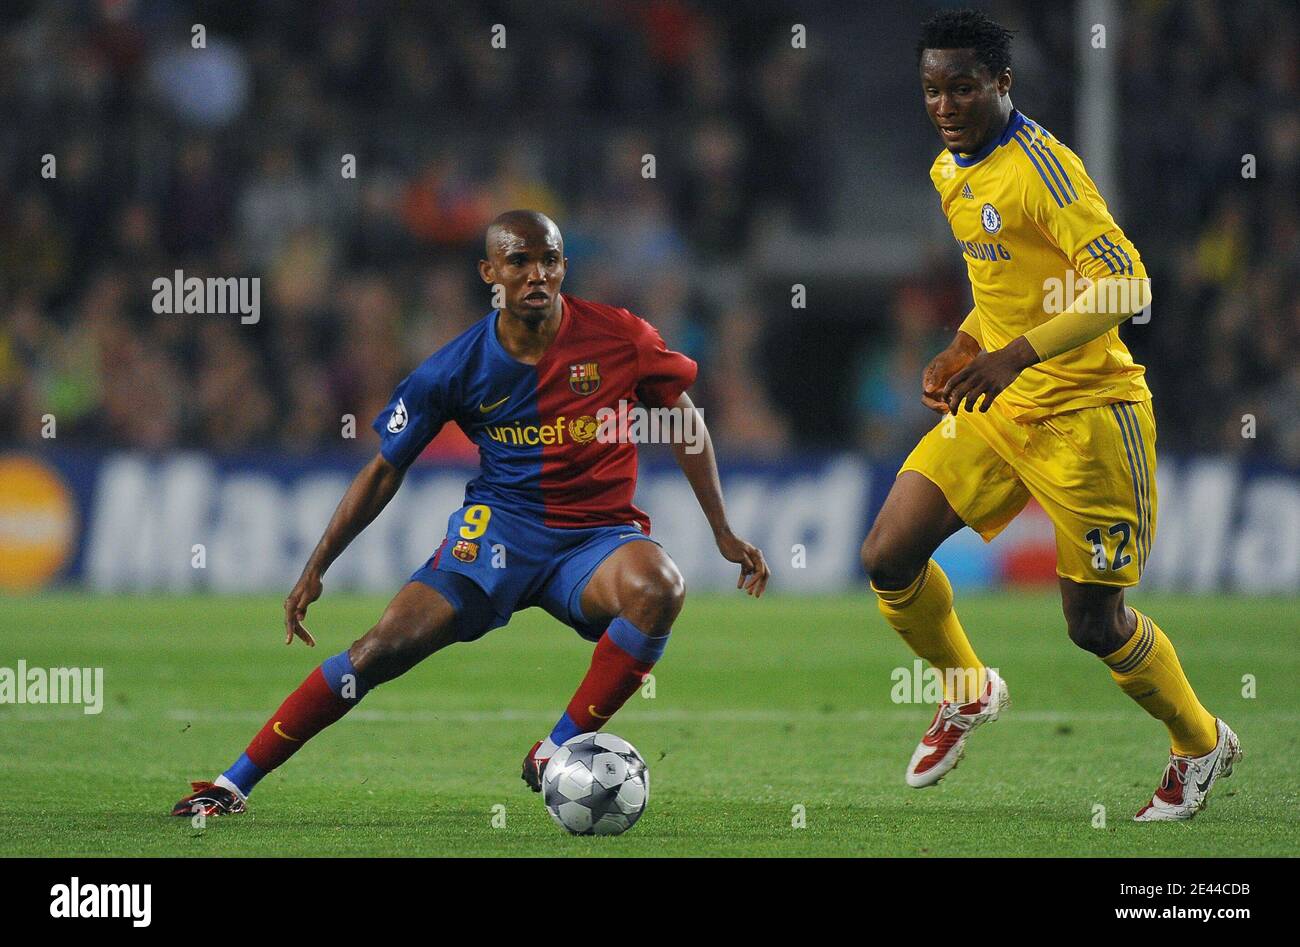 FC Barcelona's Samuel Eto'o and Chelsea's John Mikel Obi during the UEFA Champions League, Semi Final, First Leg, Barcelona vs Chelsea at the Nou Camp stadium in Barcelona, Spain on April 28, 2009. The match ended in a 20-0 draw. Photo by Steeve McMay/ABACAPRESS.COM Stock Photo